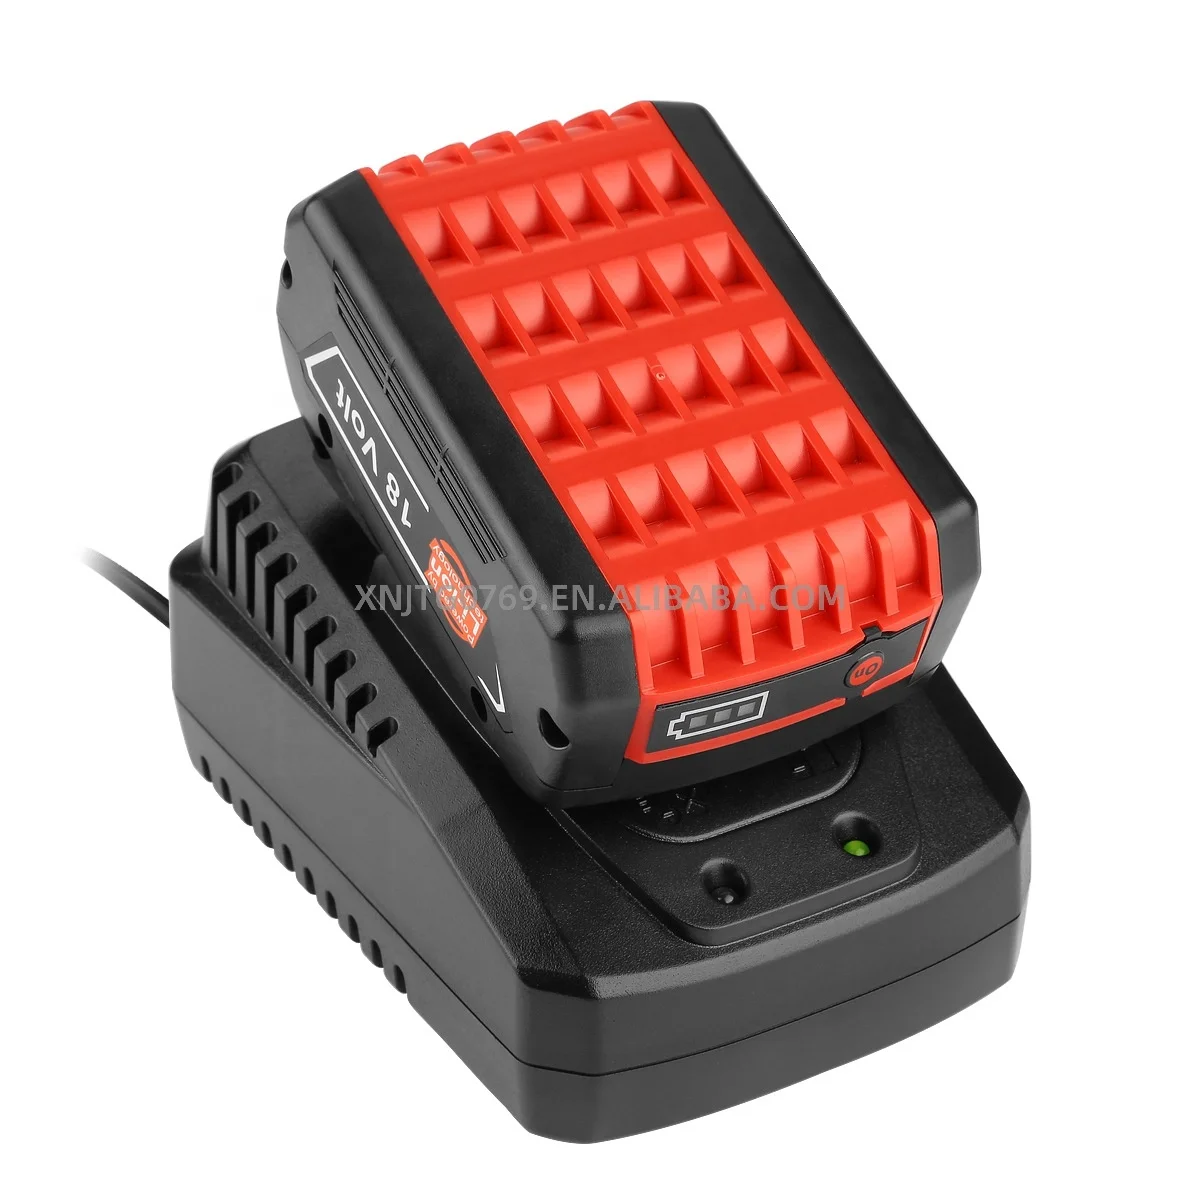 

AL1820CV AL1860CV Replacement Power Tool Charger for Bosch 14.4-18V Lithium Battery BC1880 BAT609, As picture